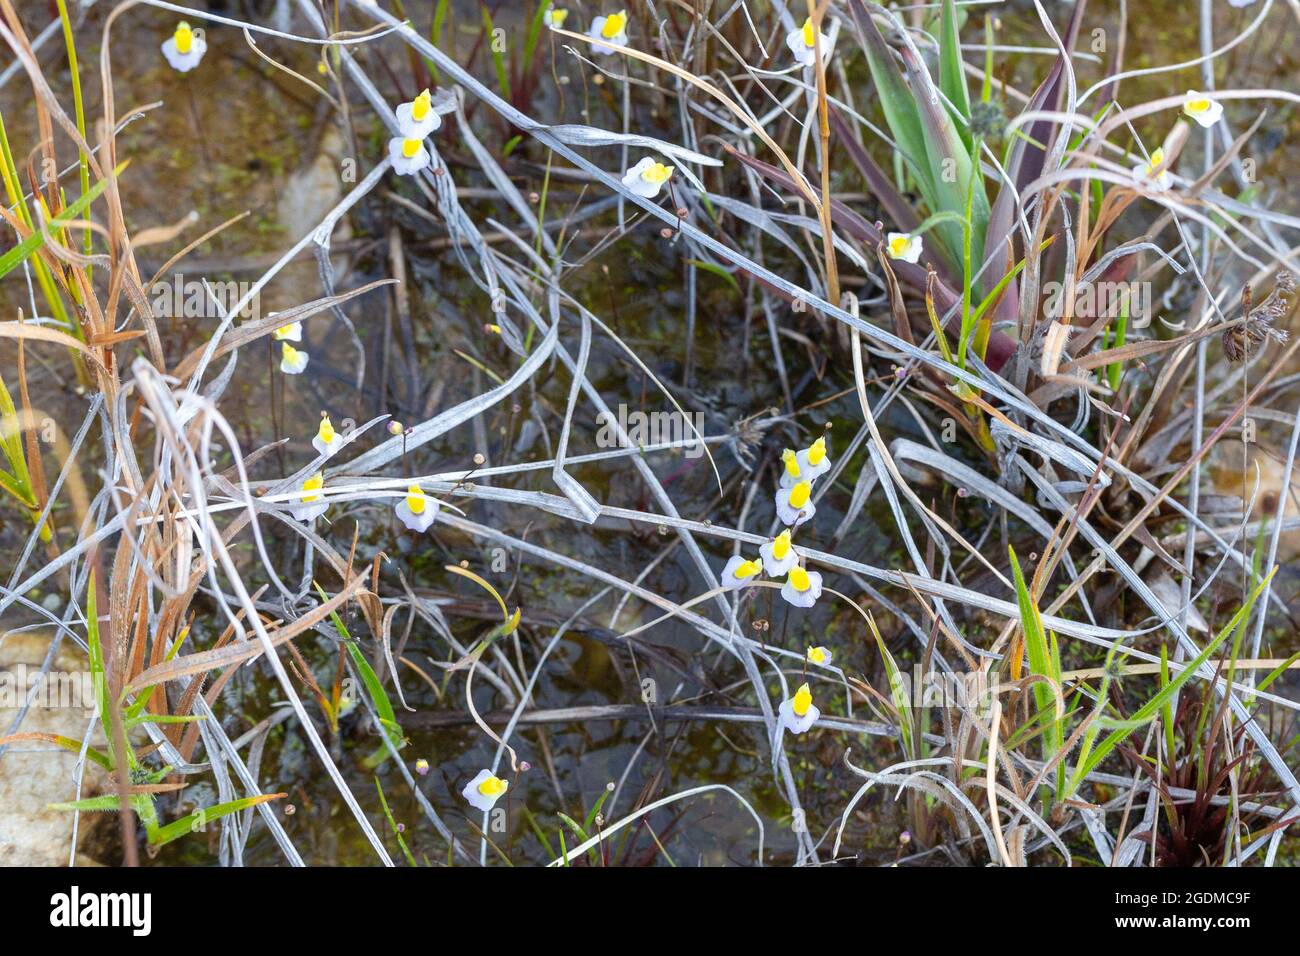 Some flowers of the Bladderwort Utricularia bisquamata, a carnivorous plant, seen in natural habitat near Tulbagh in the Western Cape of South Africa Stock Photo